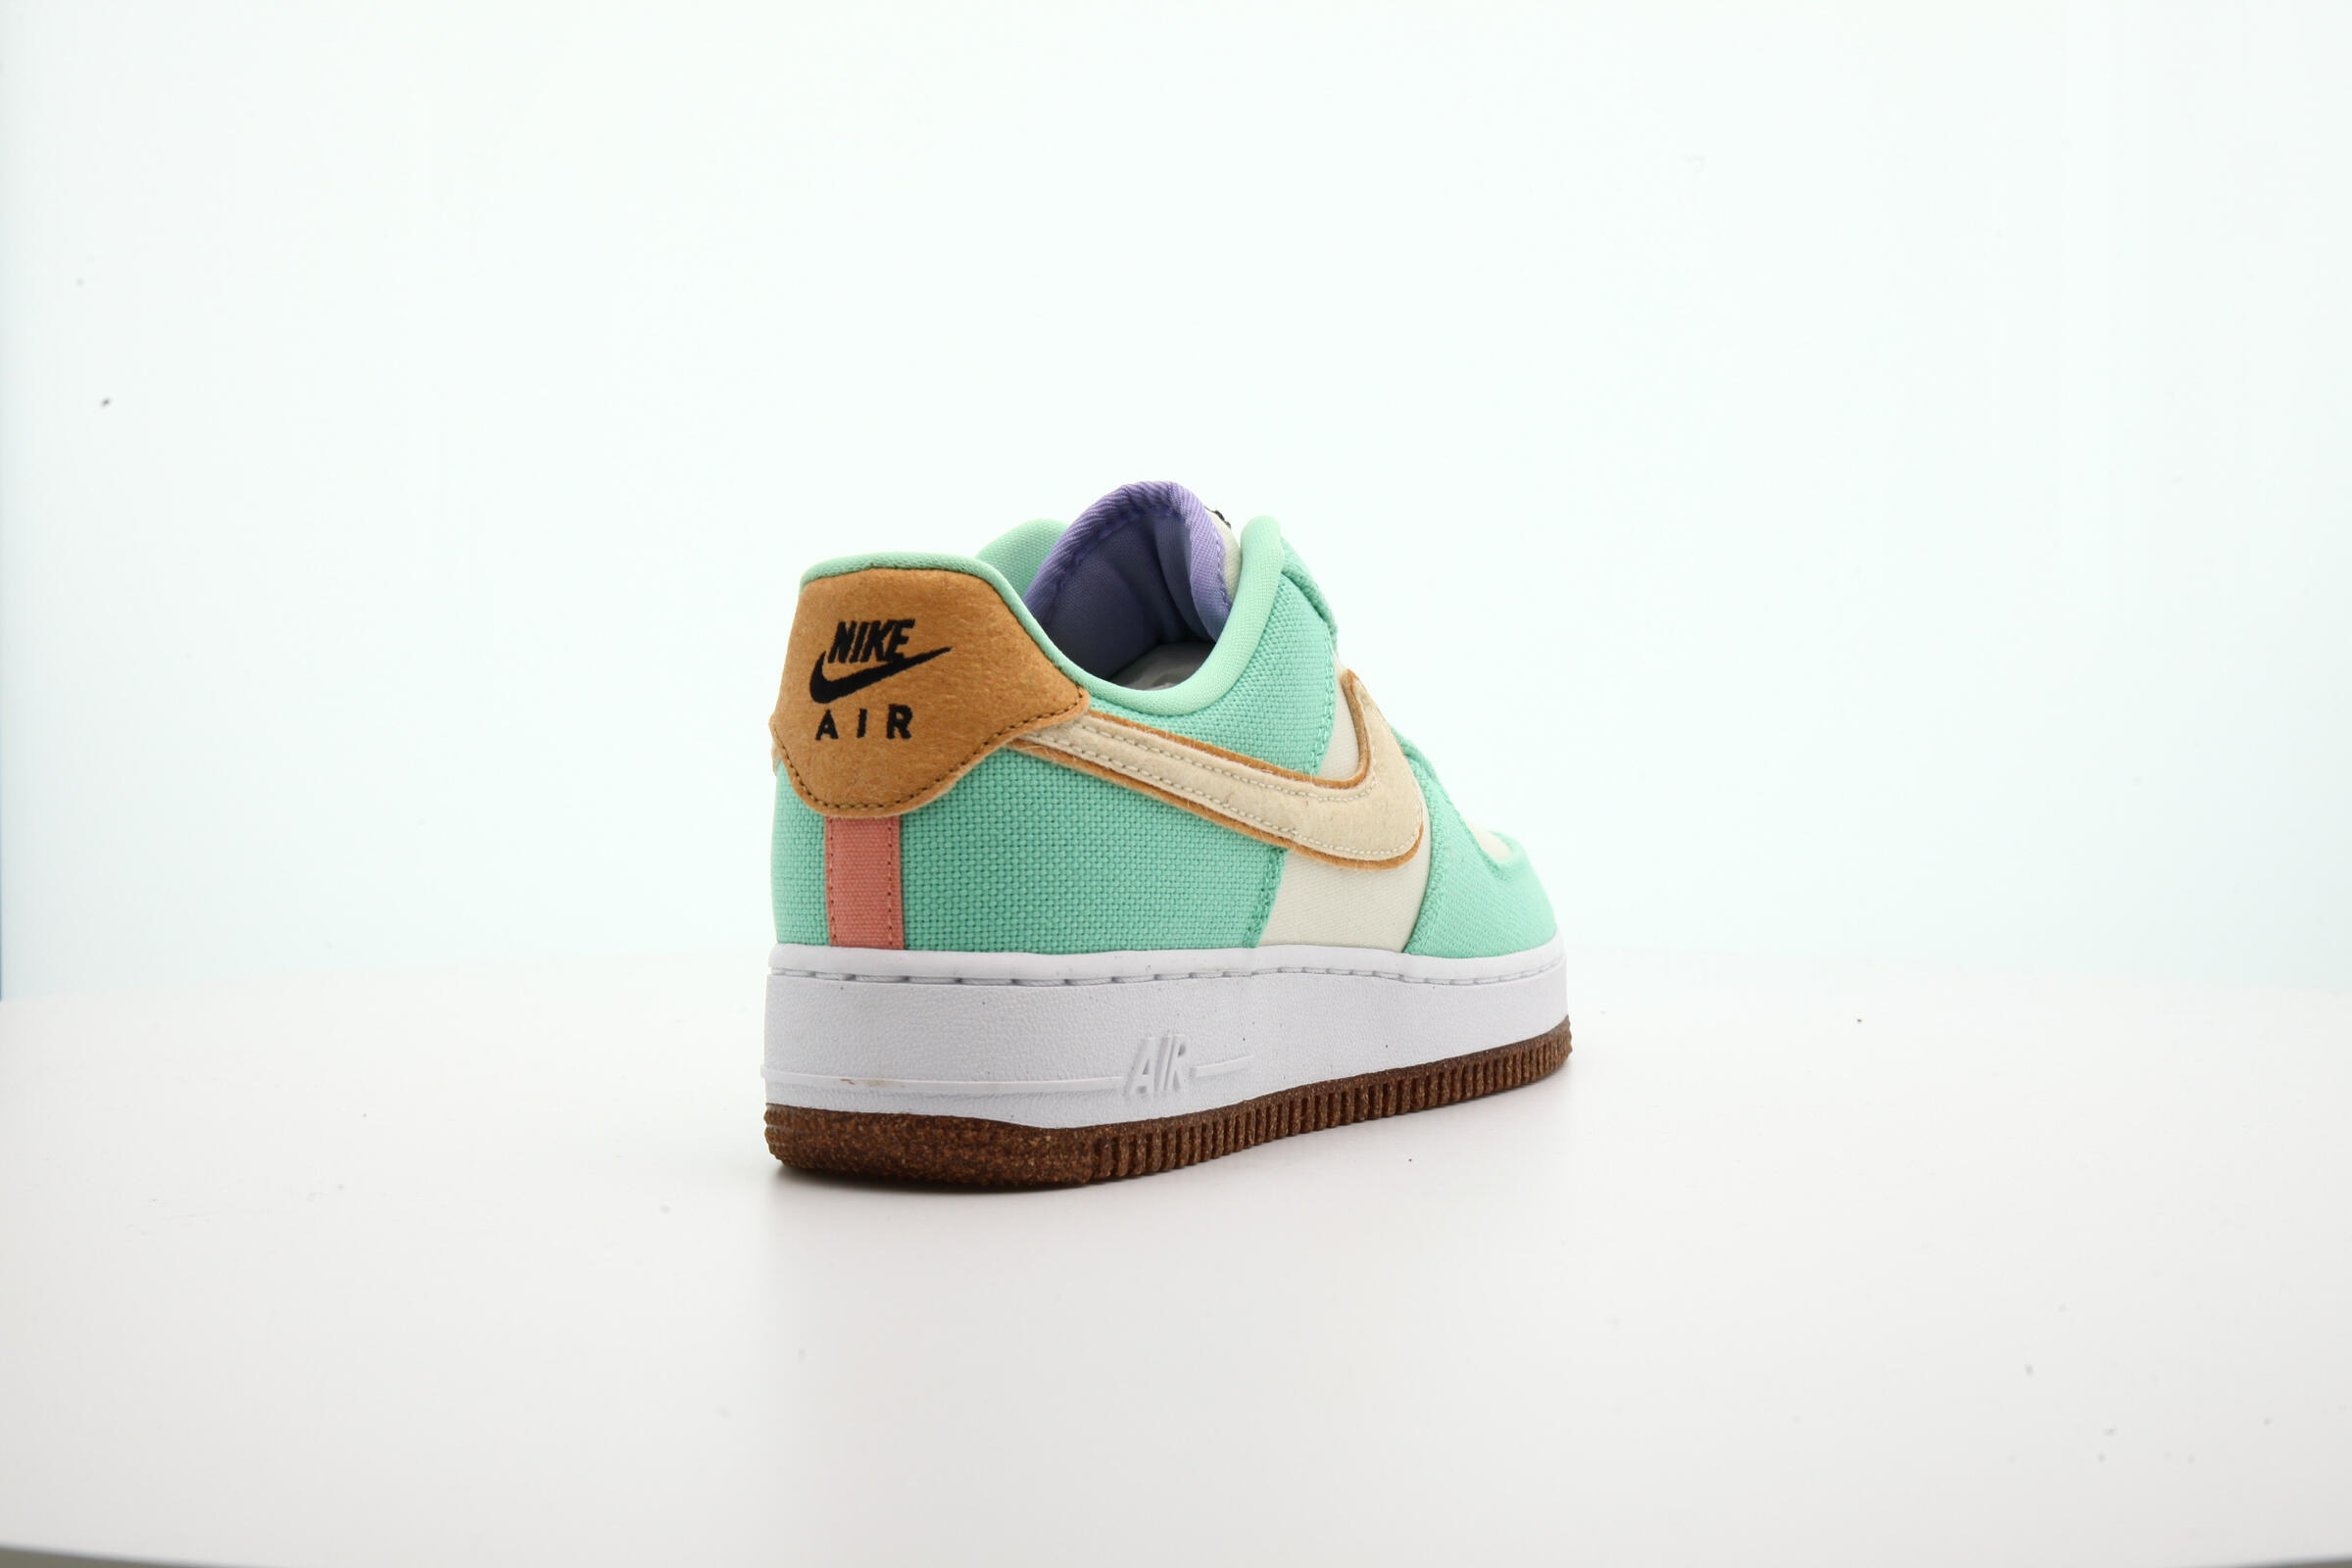 Nike WMNS AIR FORCE 1 '07 LX "HAPPY PINEAPPLE"